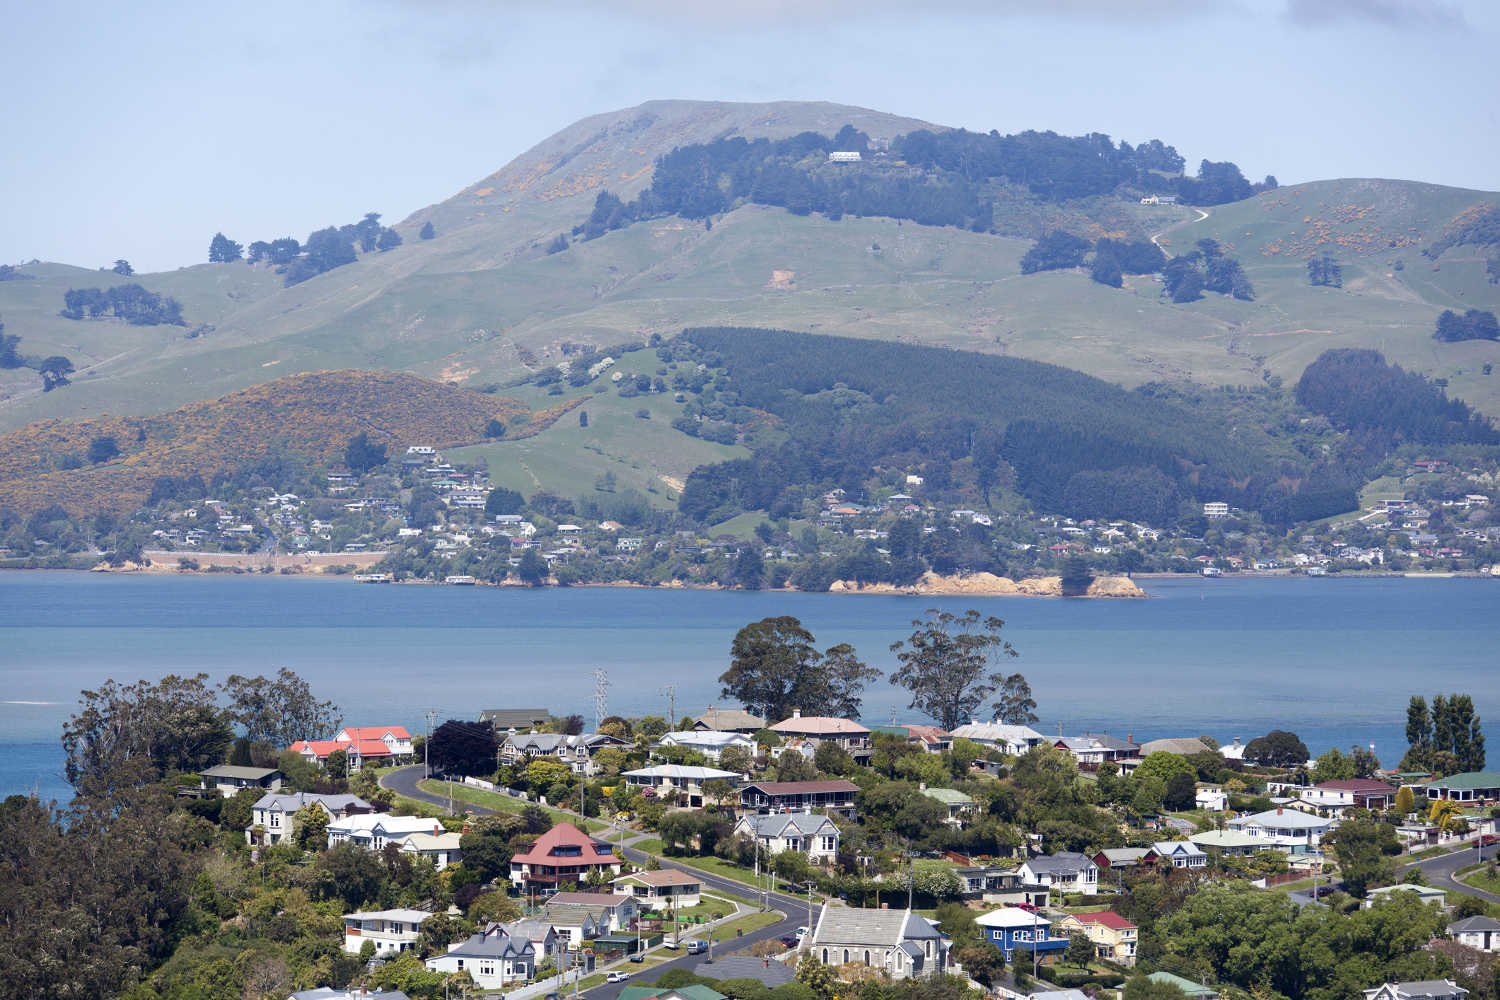 The view of Dunedin city suburb Port Chalmers with Portobello village on the other side of Otago Harbour New Zealand